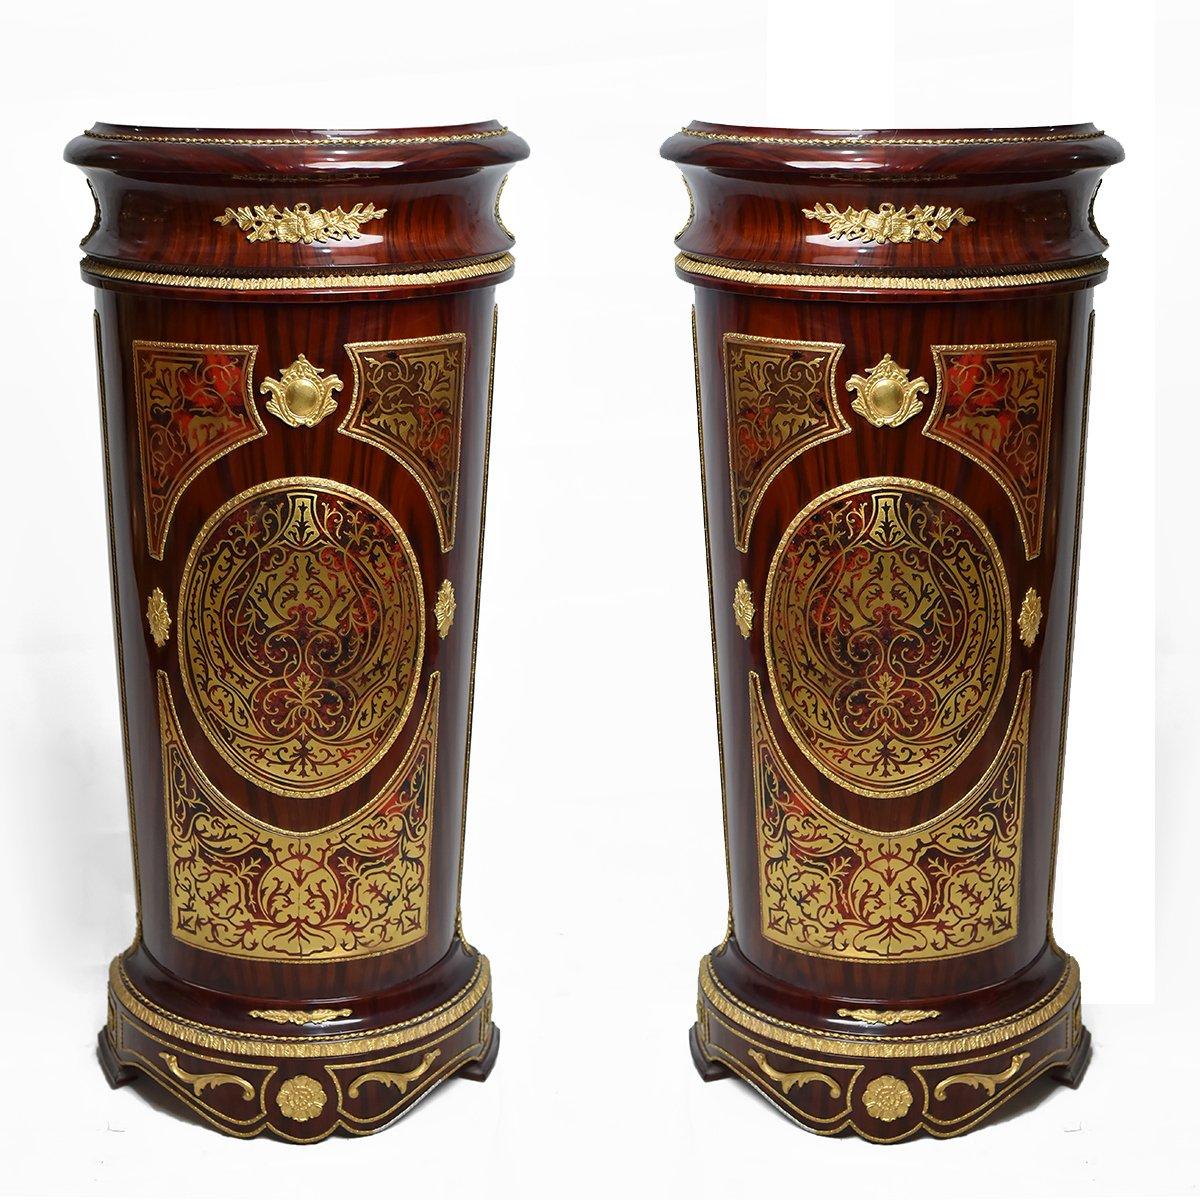 A fantastic Gilded Louis XV style Boulle pedestal (2 Set), 20th century.

One of the greatest tragedies in history that Louis XV, who stayed on a throne for 59 years, wasn’t expected to be a king because he was the youngest of three sons for the